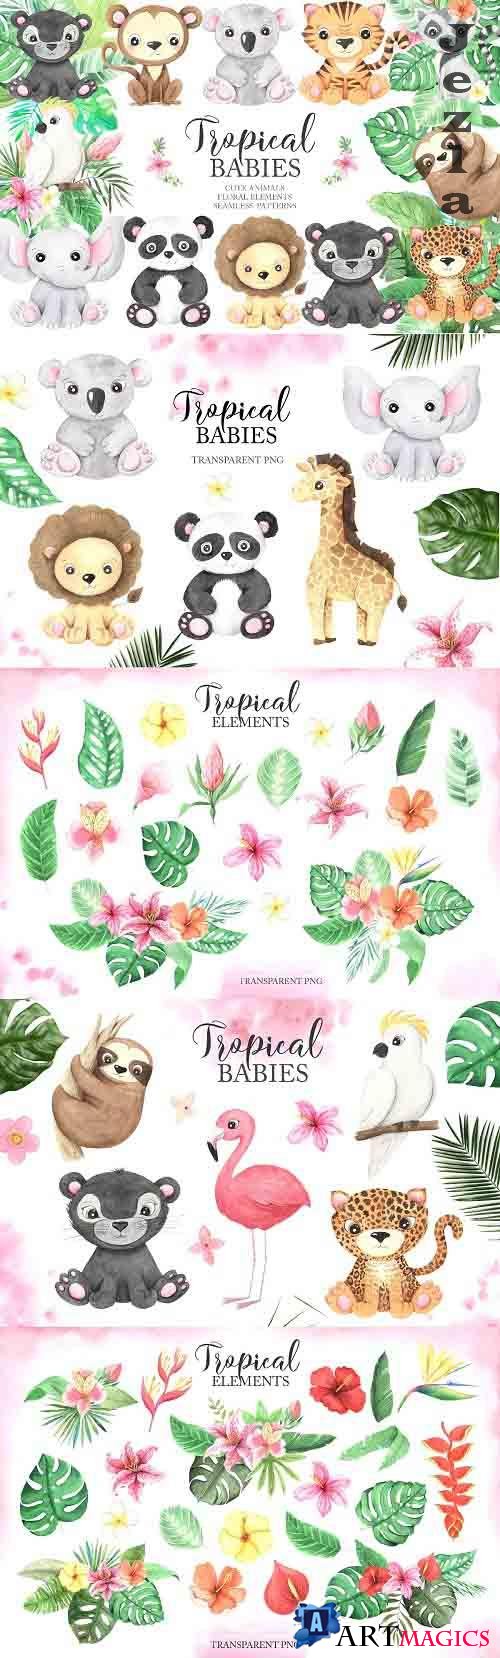 Watercolor Tropical Animals Clipart - 4767347